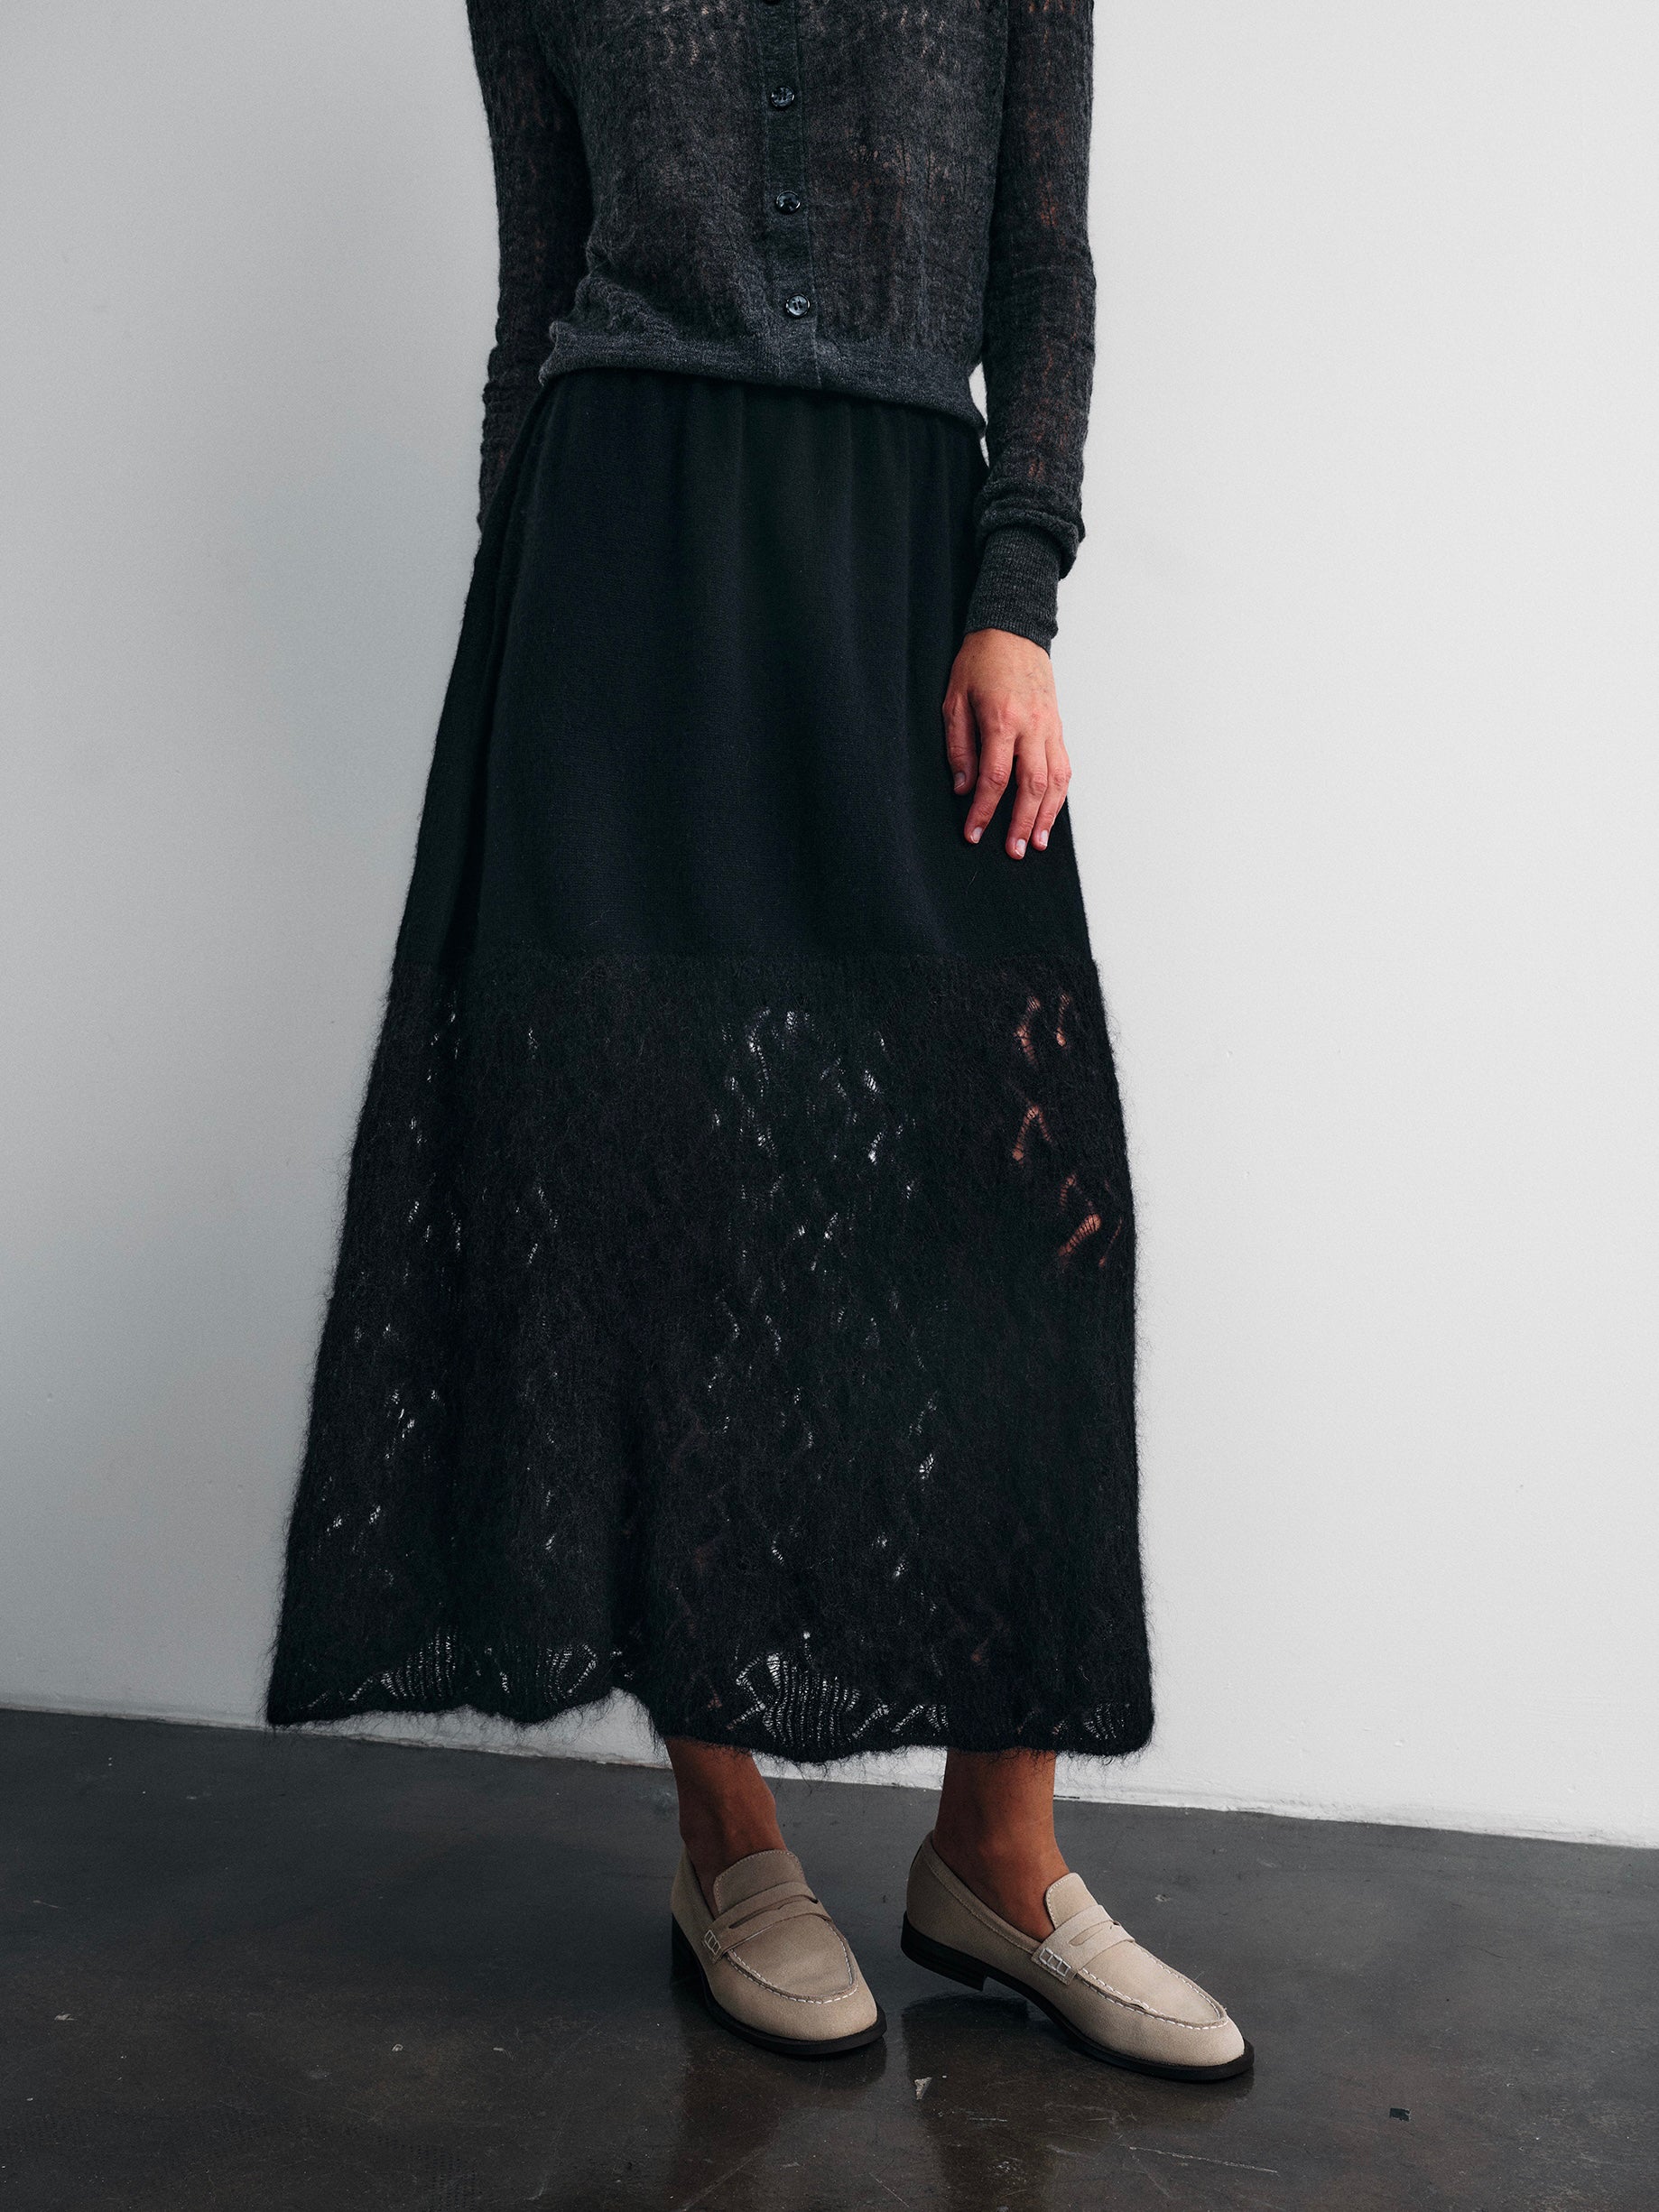 COSYCOZY Hollow Out Jacquard Knit Skirt